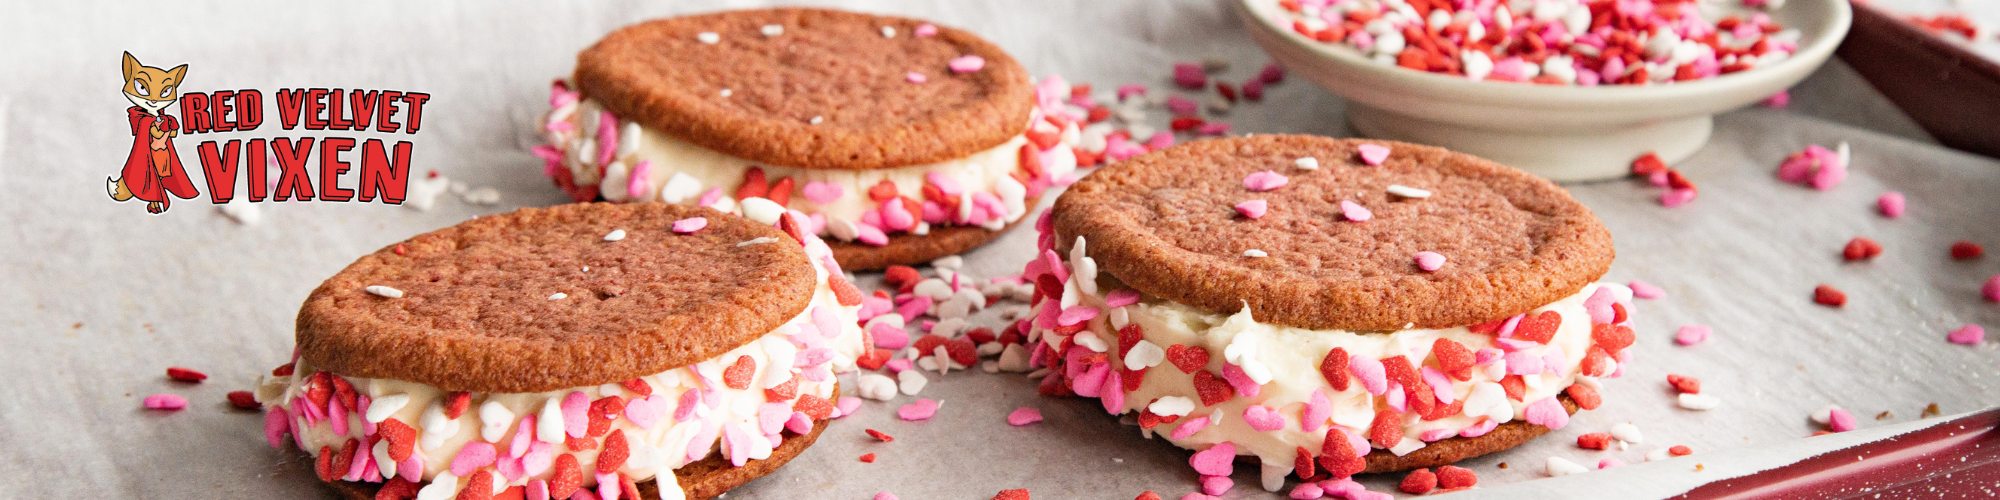 Four Red Velvet Vixen Recipes for a Delicious Valentine’s Day